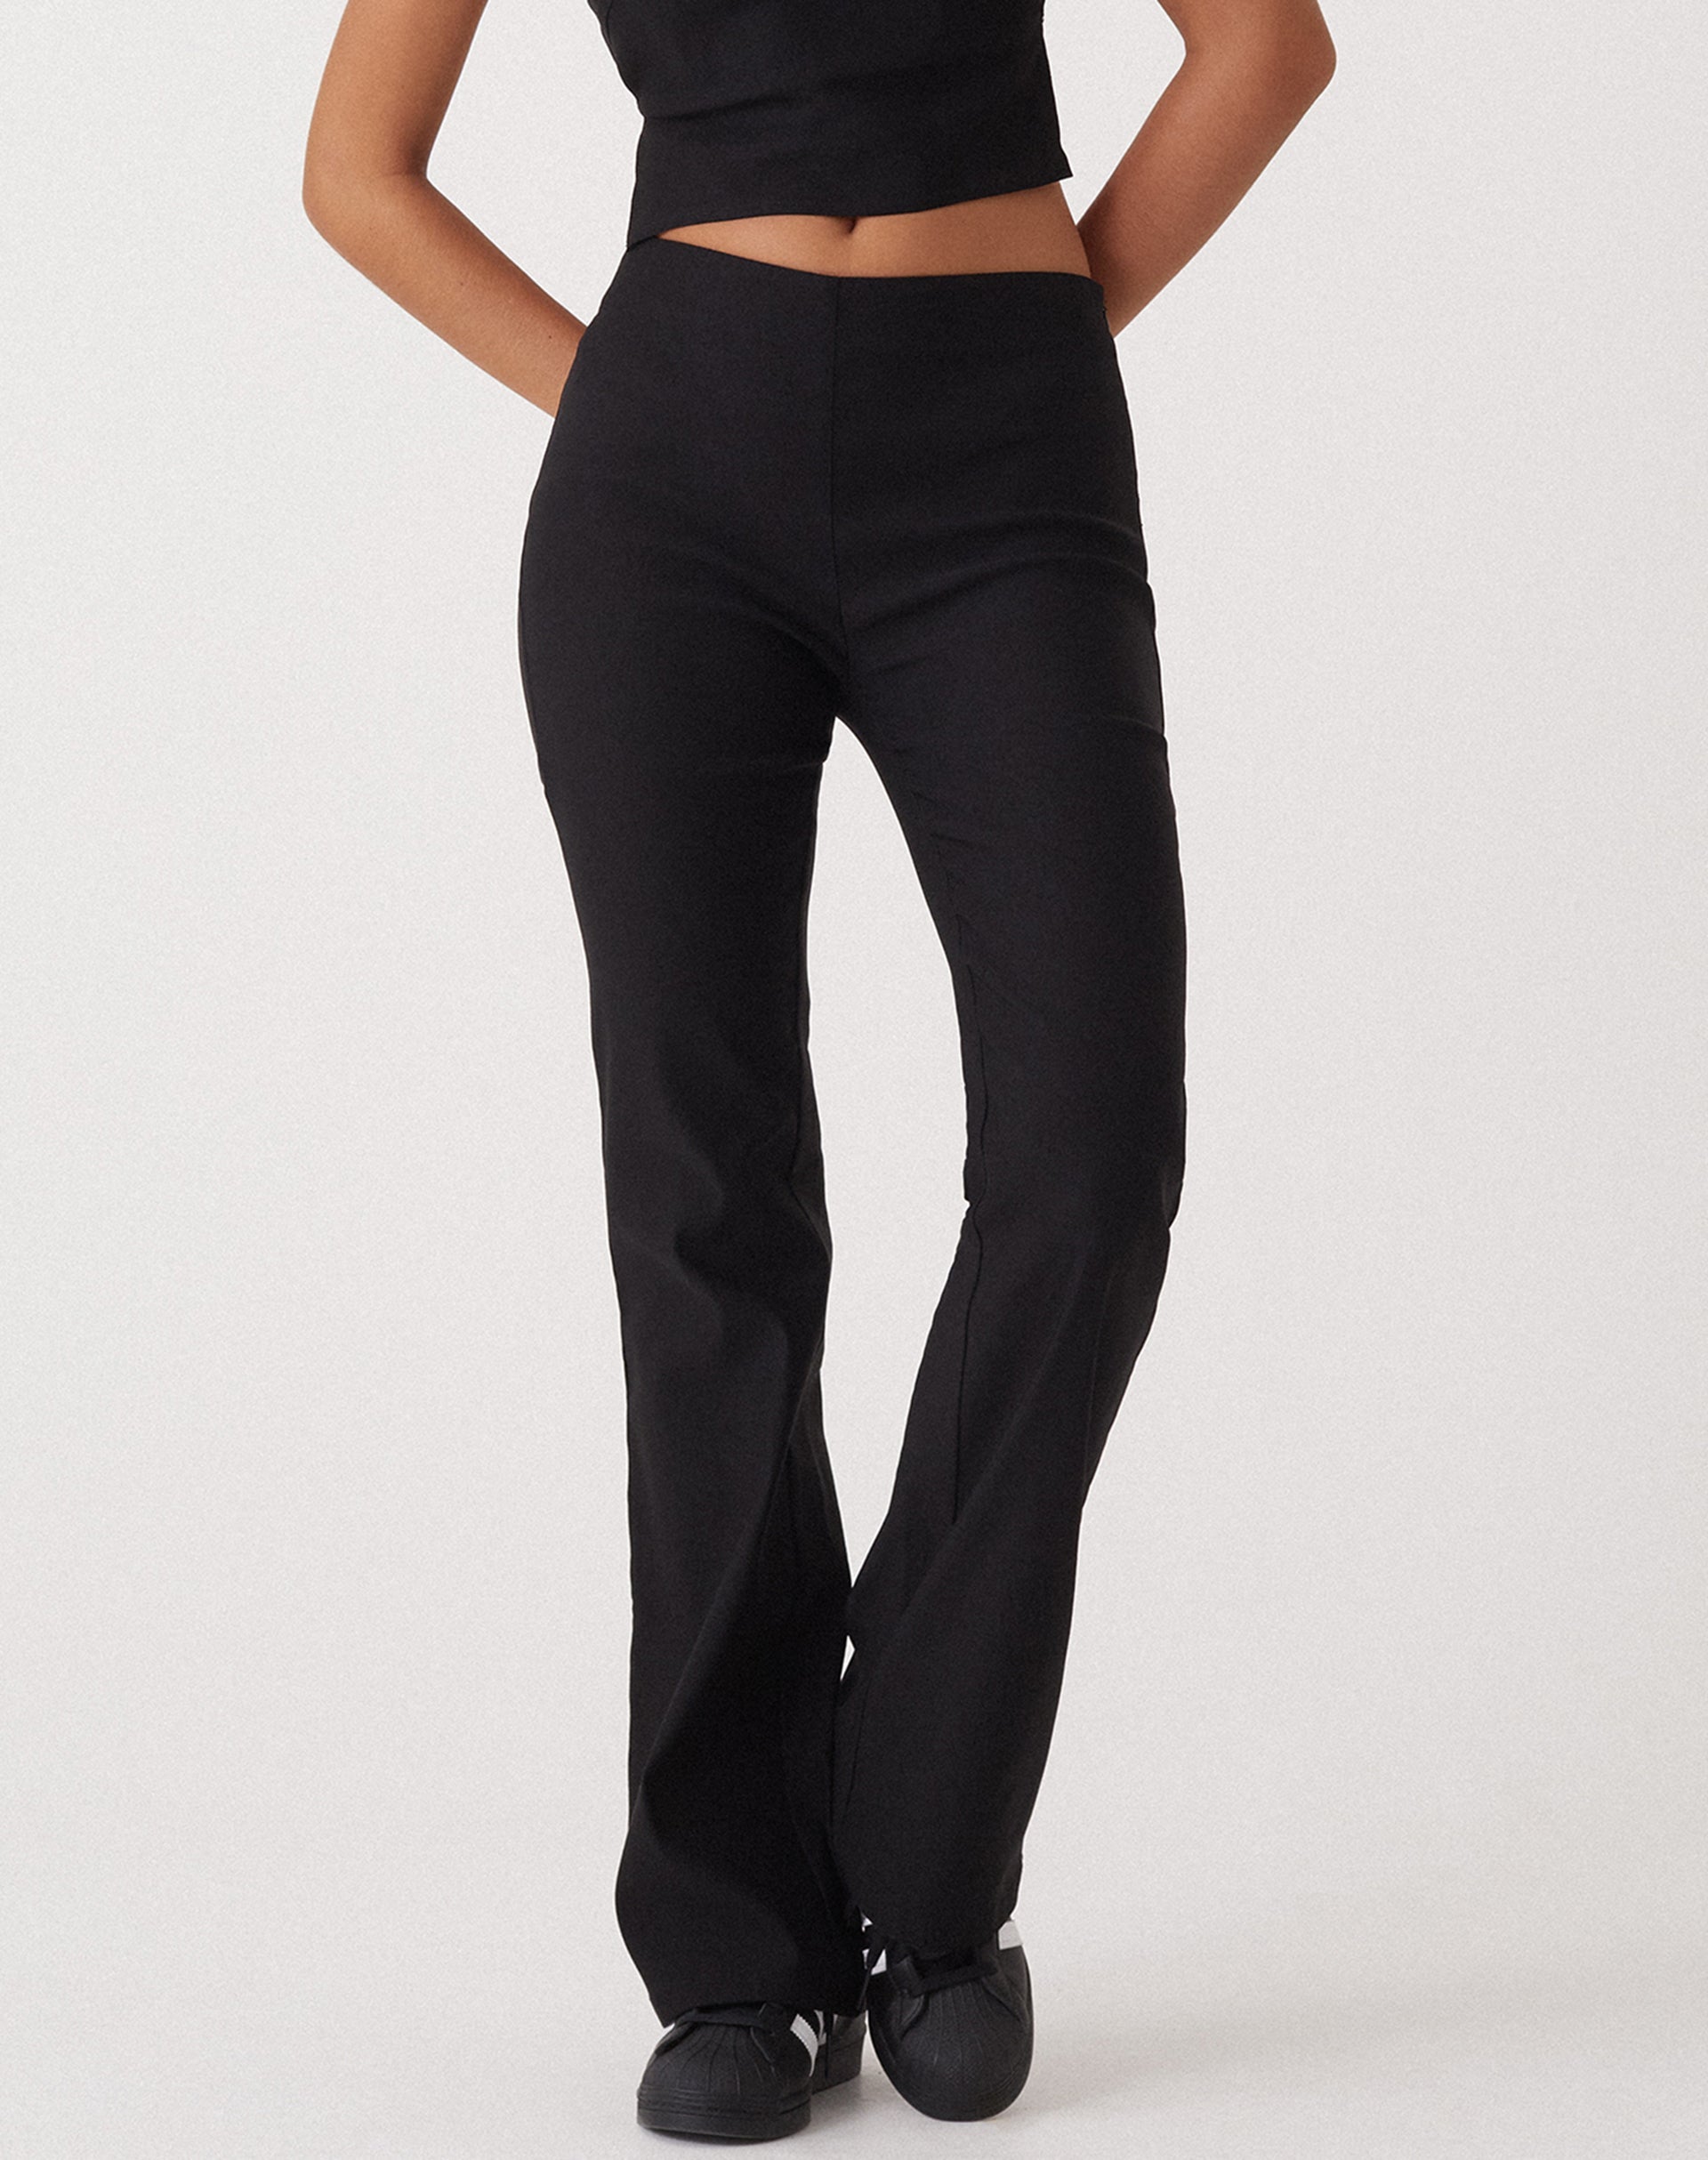 image of MOTEL X OLIVIA NEILL Levin Flared Leg Trouser in Tailoring Black